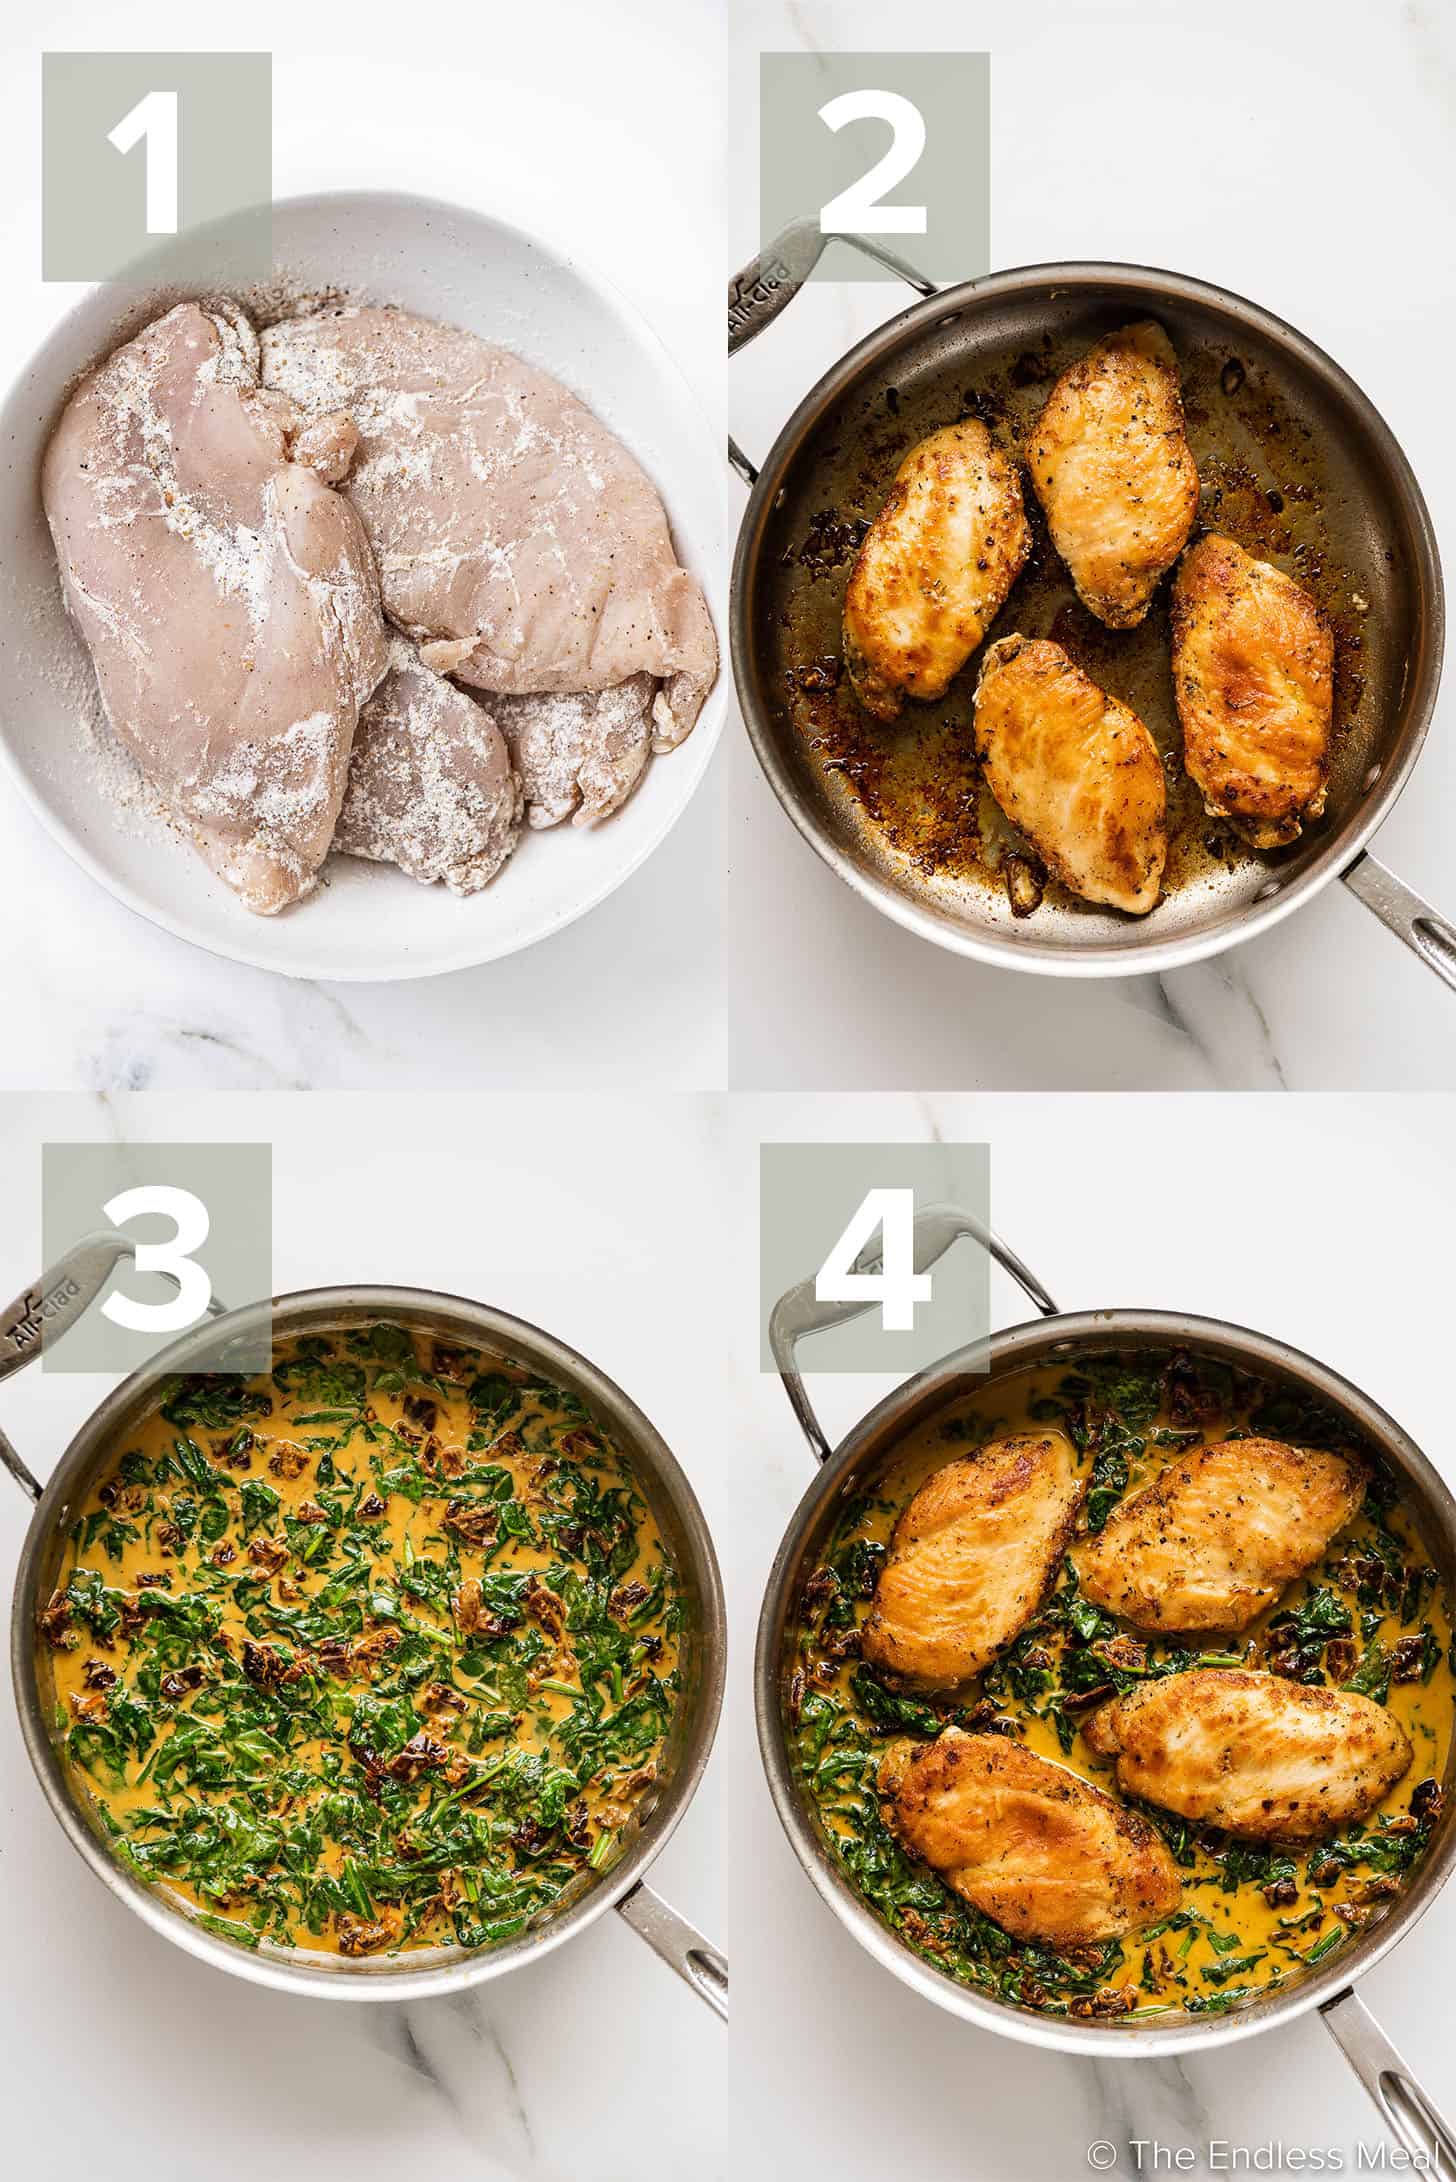 4 pictures showing how to make Sun Dried Tomato Chicken